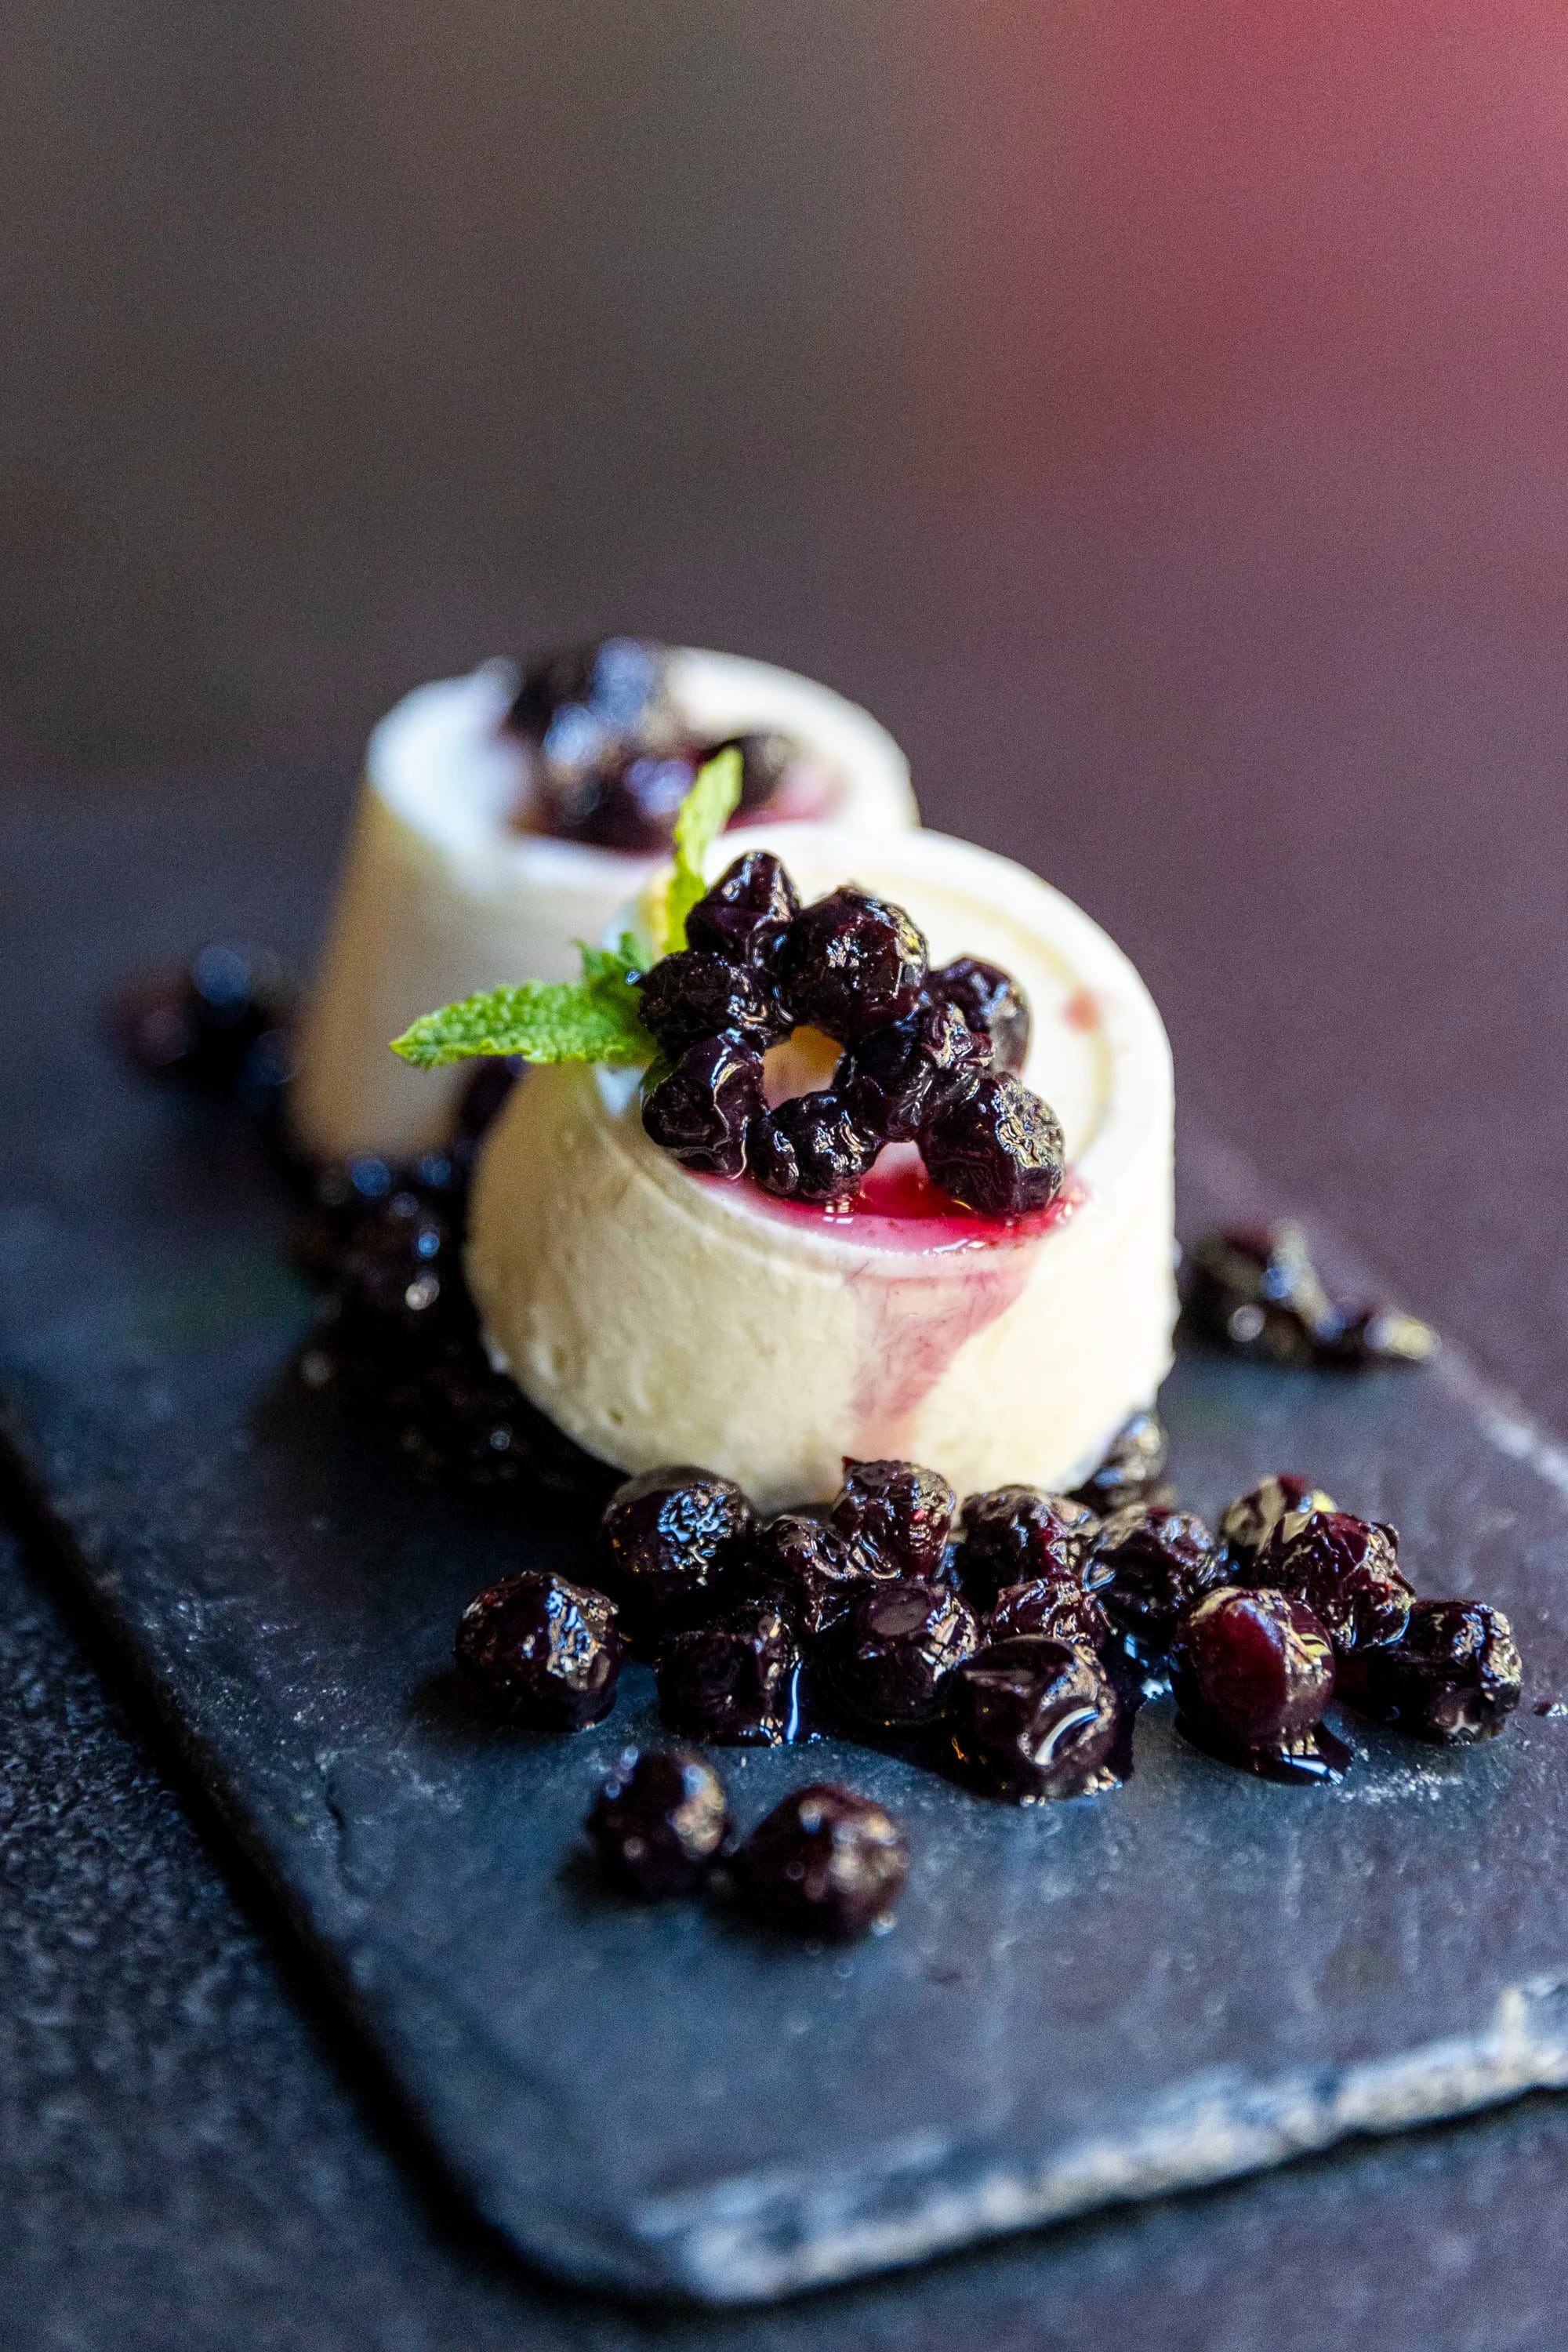 A traditional Indian ice cream (malai kulfi) topped with poached blueberries and creme-de-cassis, at Veda.